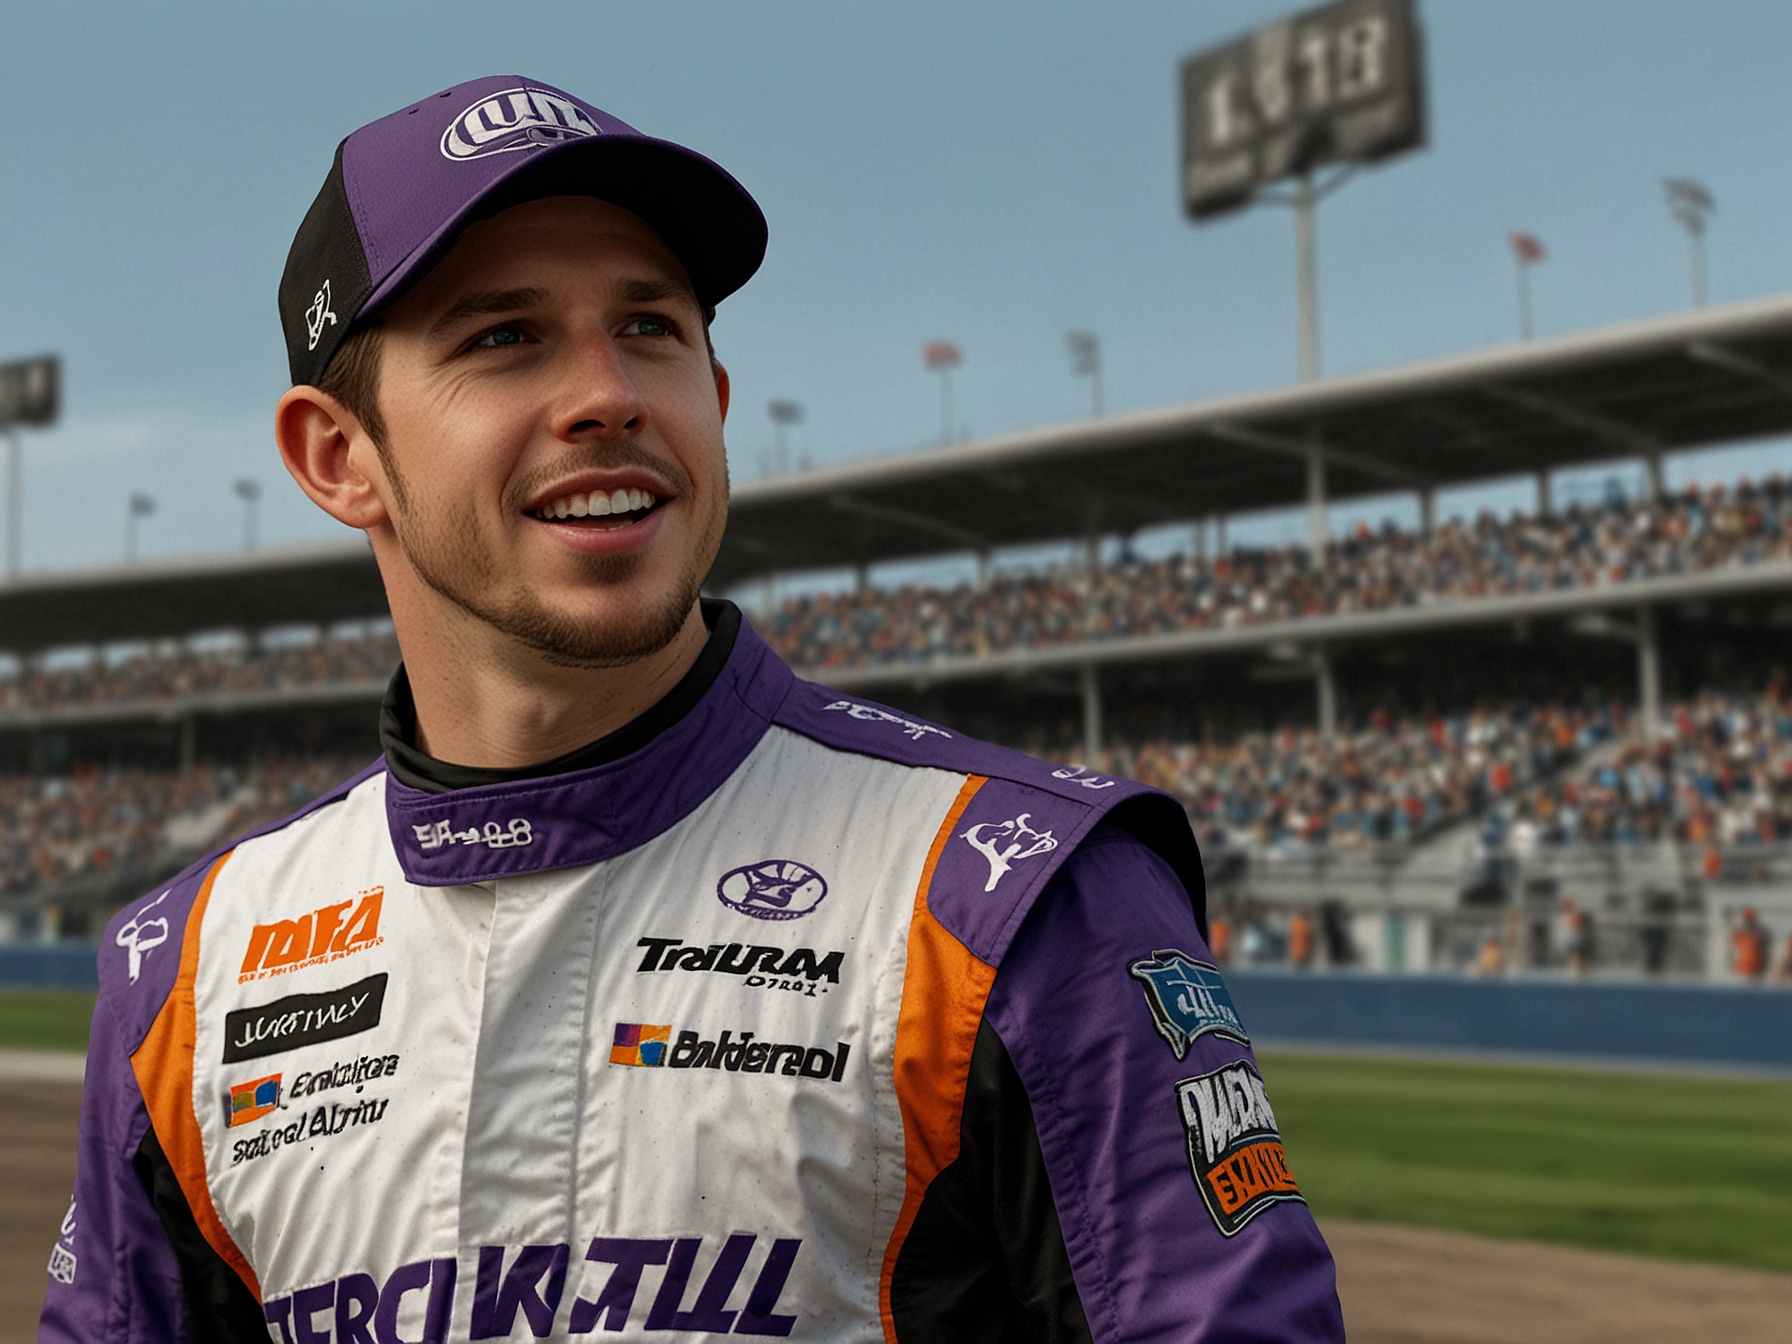 Denny Hamlin, wearing his racing suit, speaks enthusiastically during his 'Actions Detrimental' podcast, discussing his first experience and high expectations for the race at Iowa Speedway.